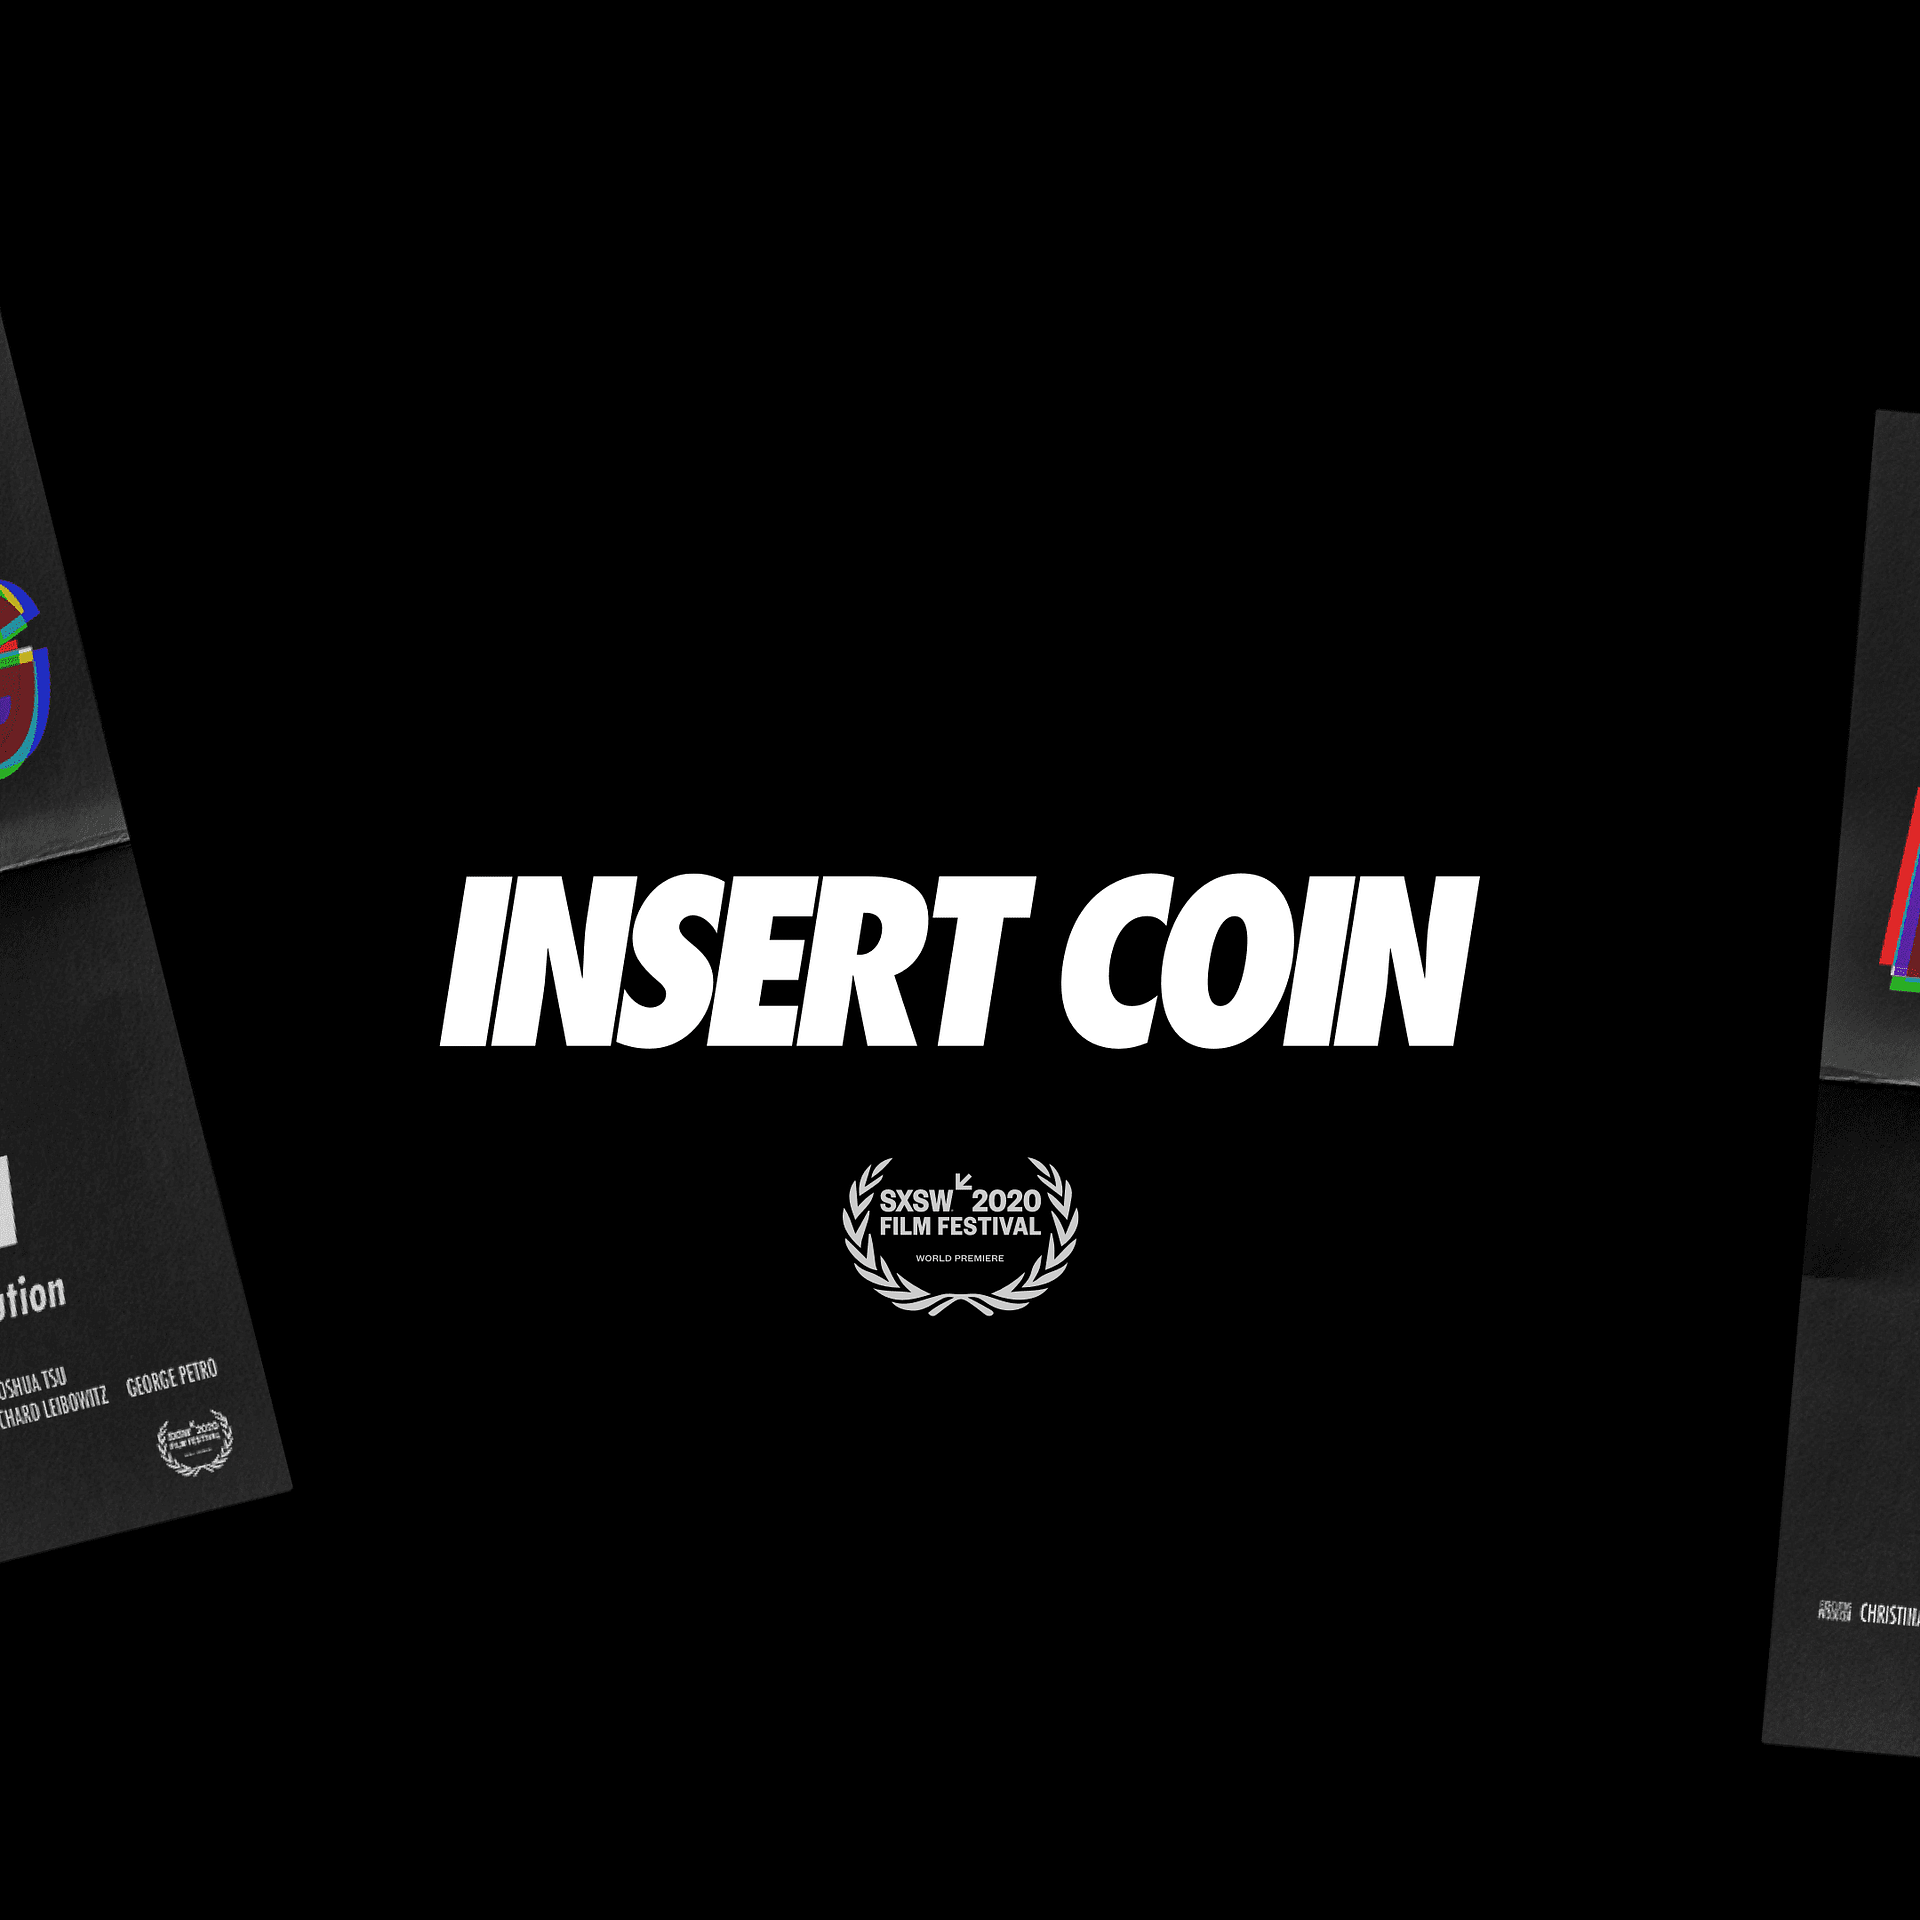 Insert Coin SXSW 2020 Documentary Debut Poster 2